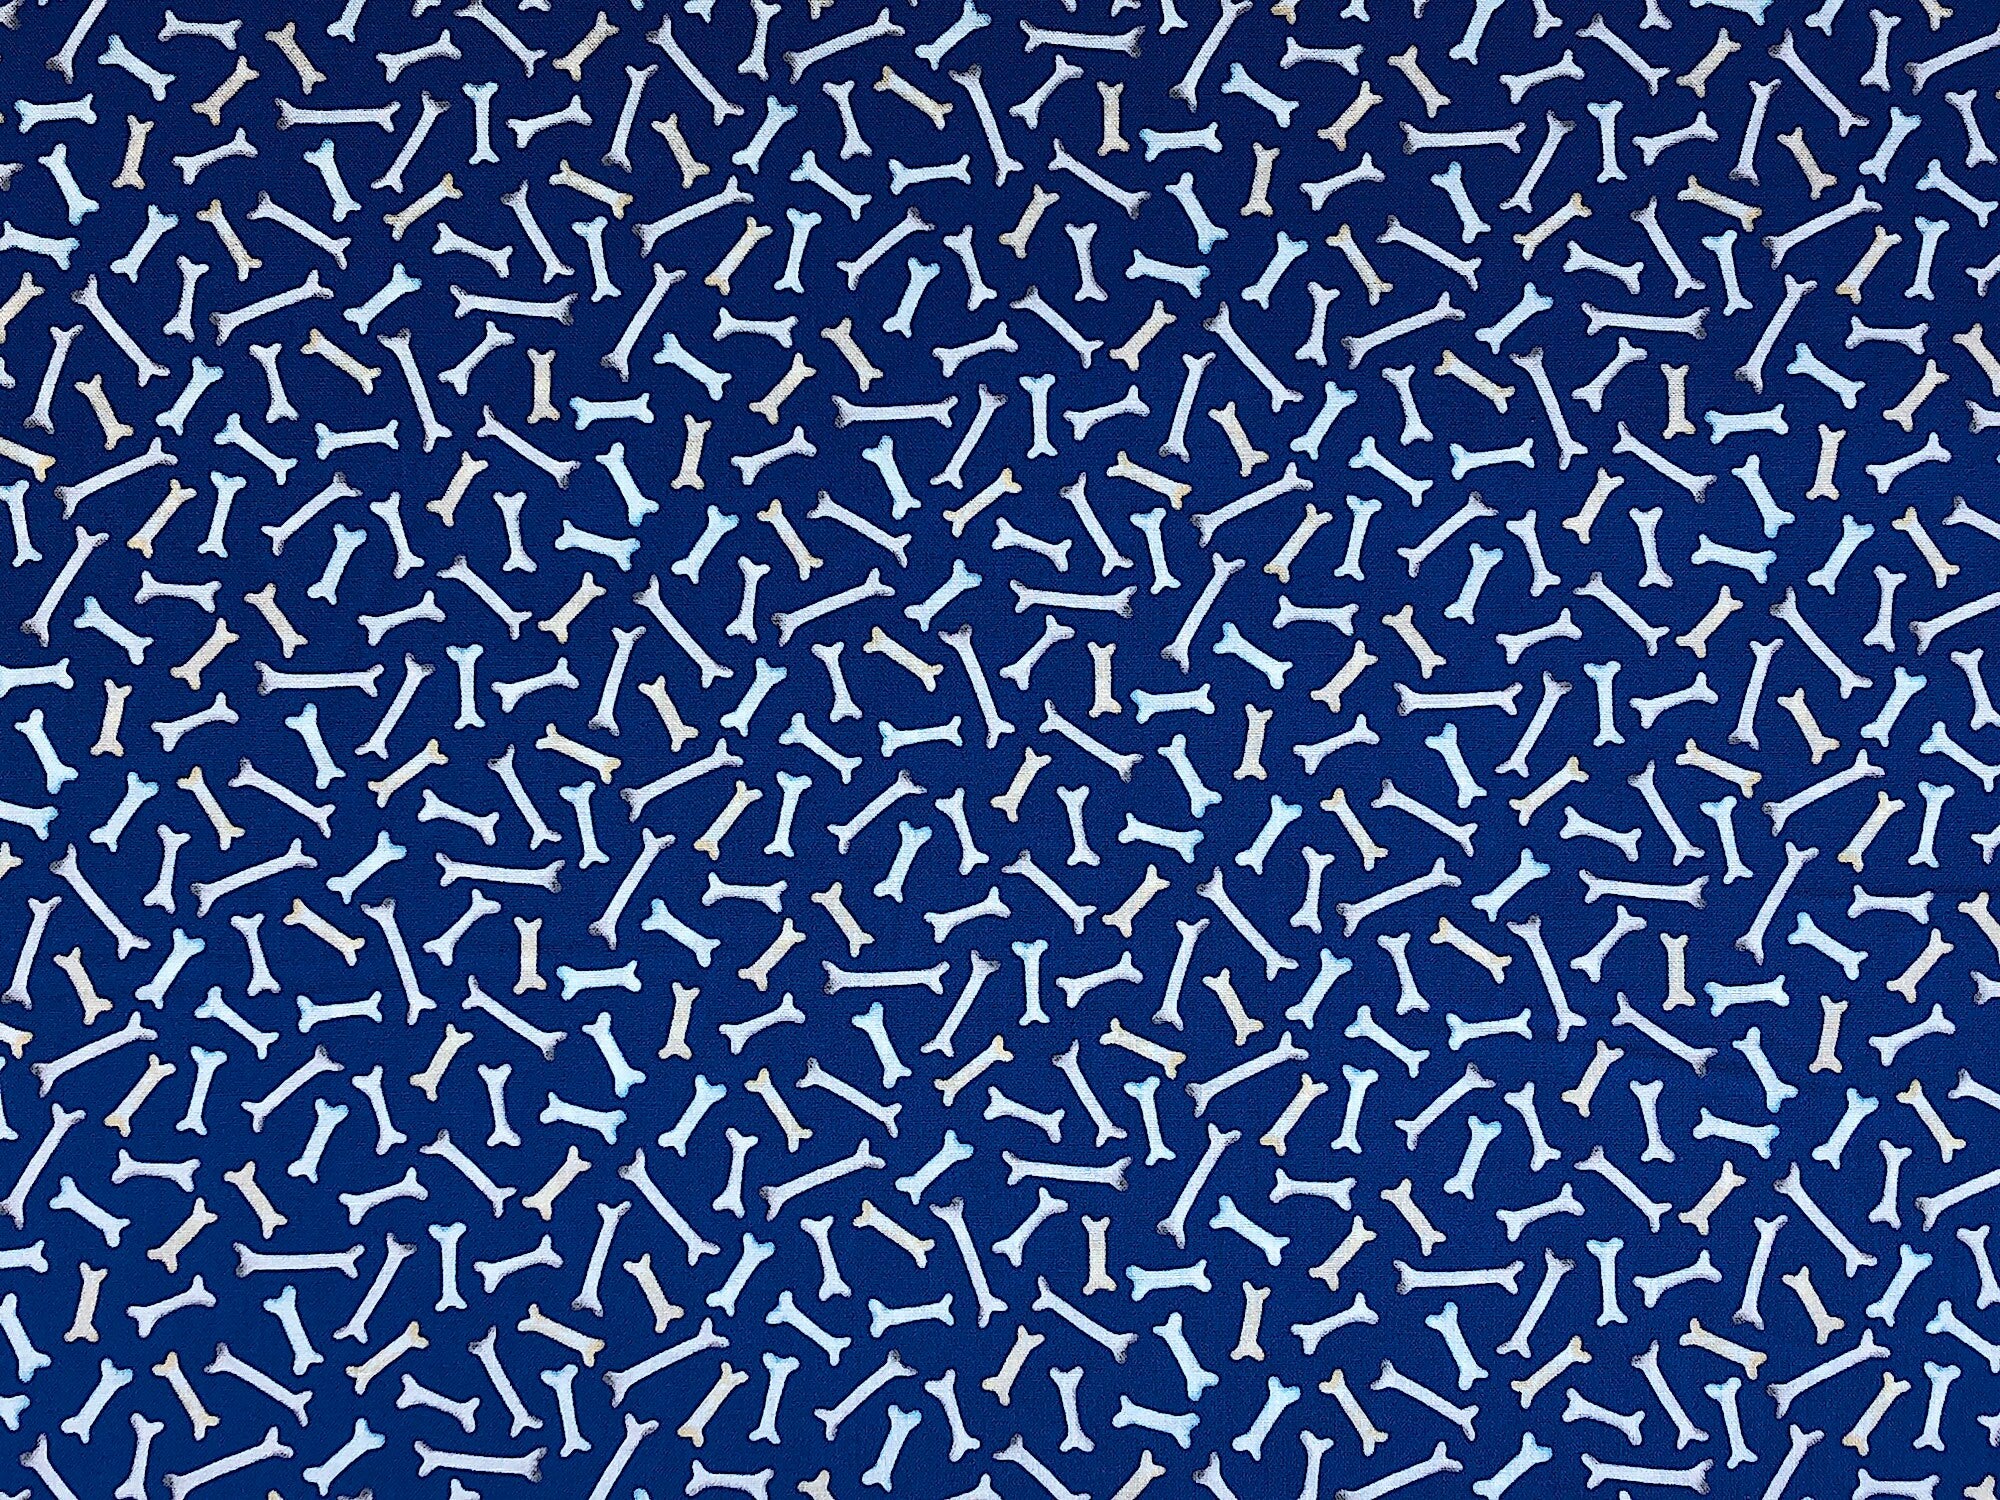 This fabric is part of the Think Pawsitive Collection by Andi Metz. This blue fabric is covered with dog bones.